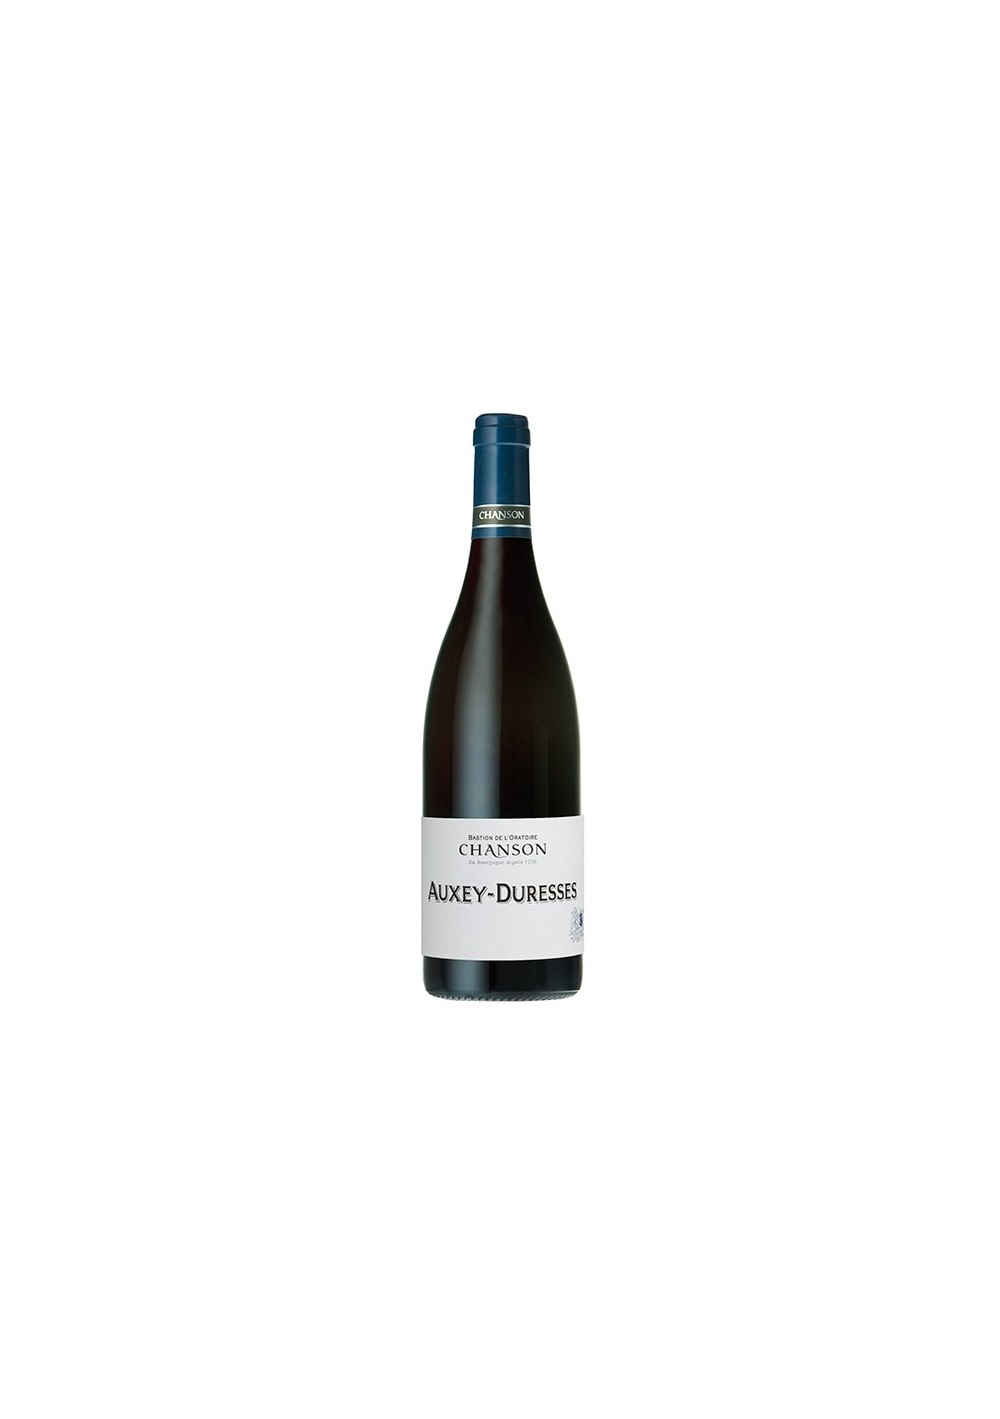 Domaine Chanson  Auxey-Duresses 2012 Bourgogne - red